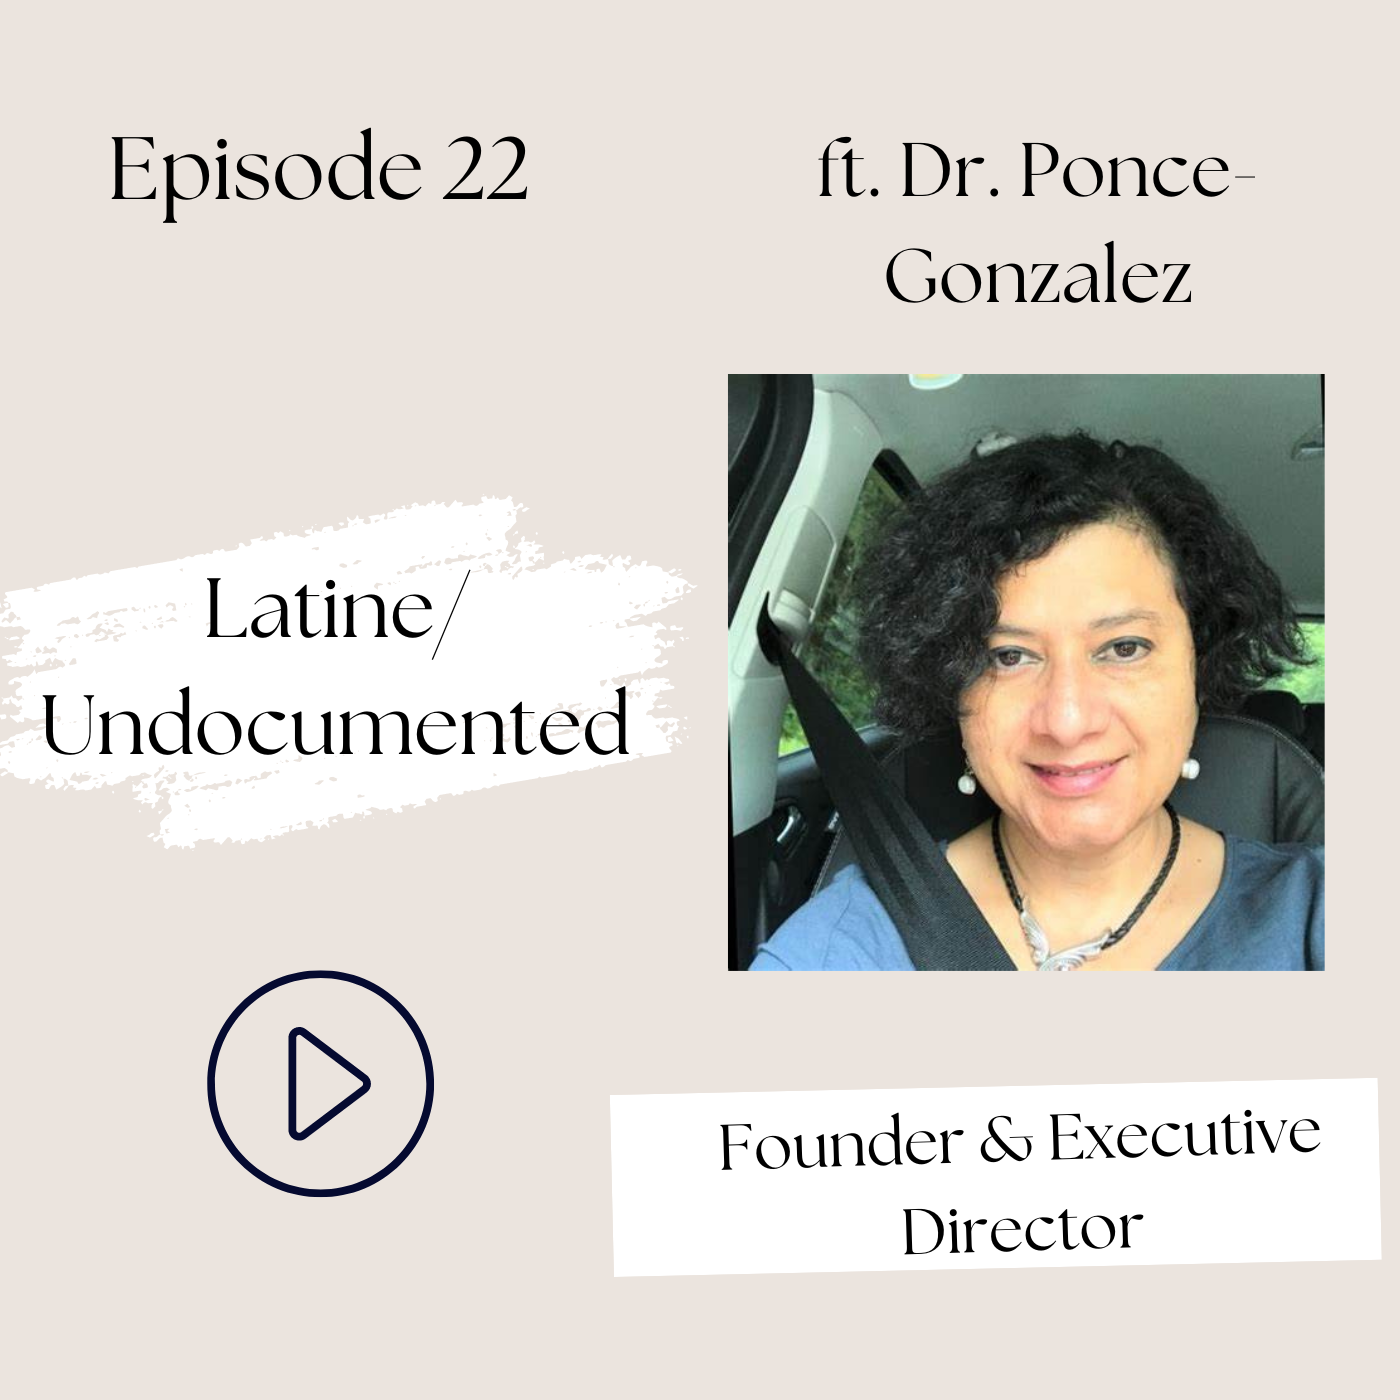 Latine/Using Community Health Workers to Care for the Undocumented (Dr. Ponce-Gonzalez, Ep 22)